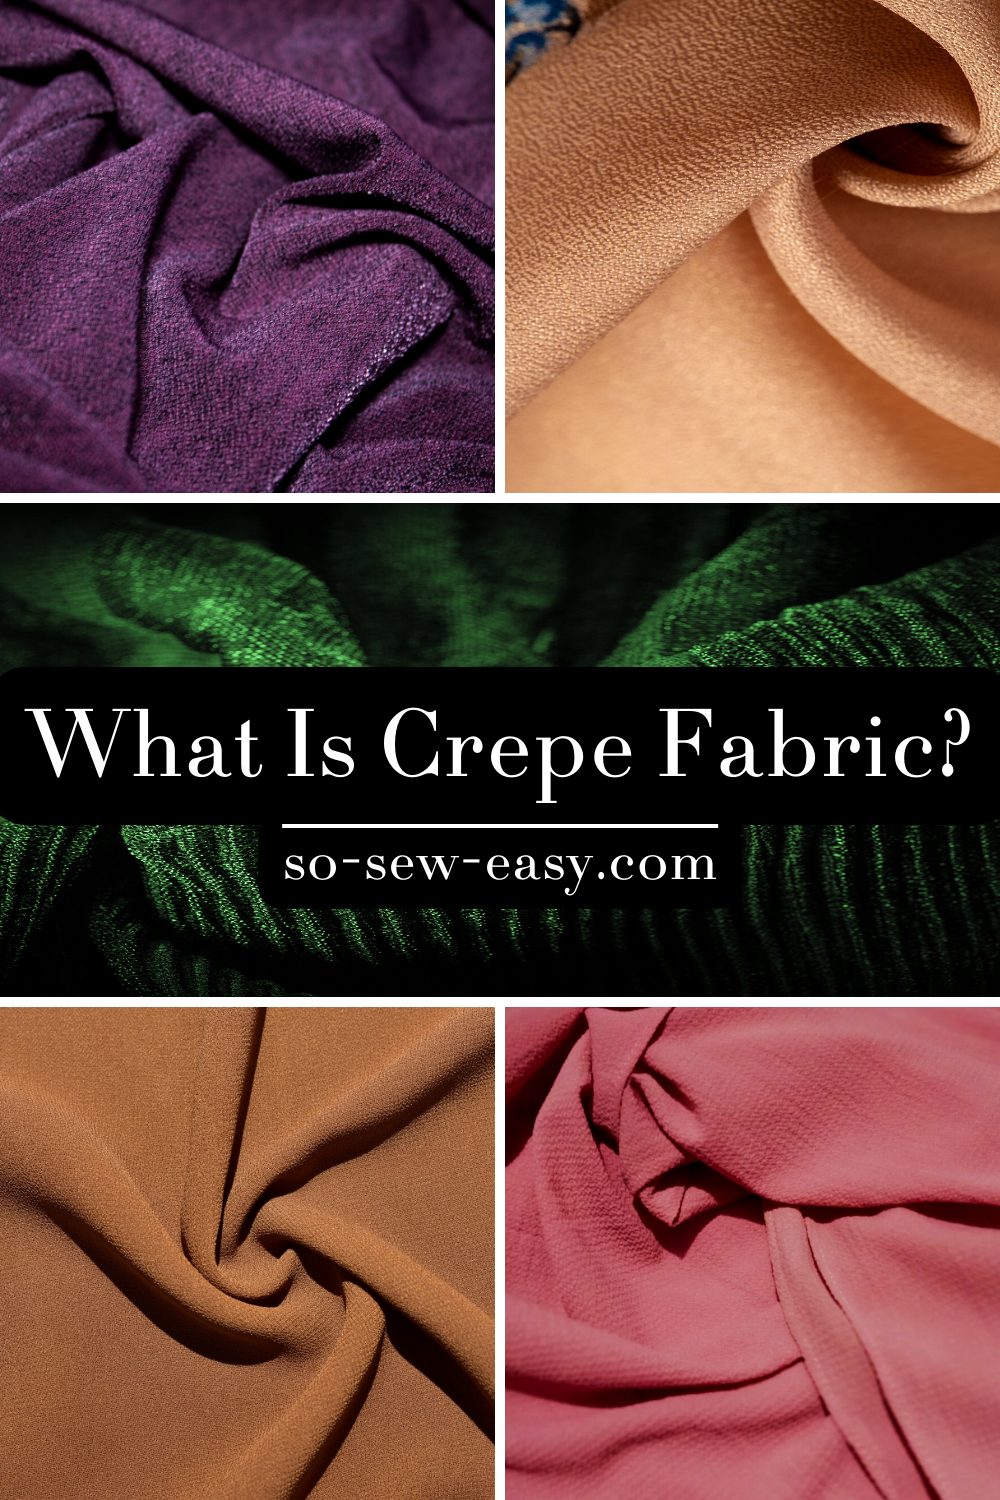 A captivating view of crumpled silk fabric, the wrinkles and